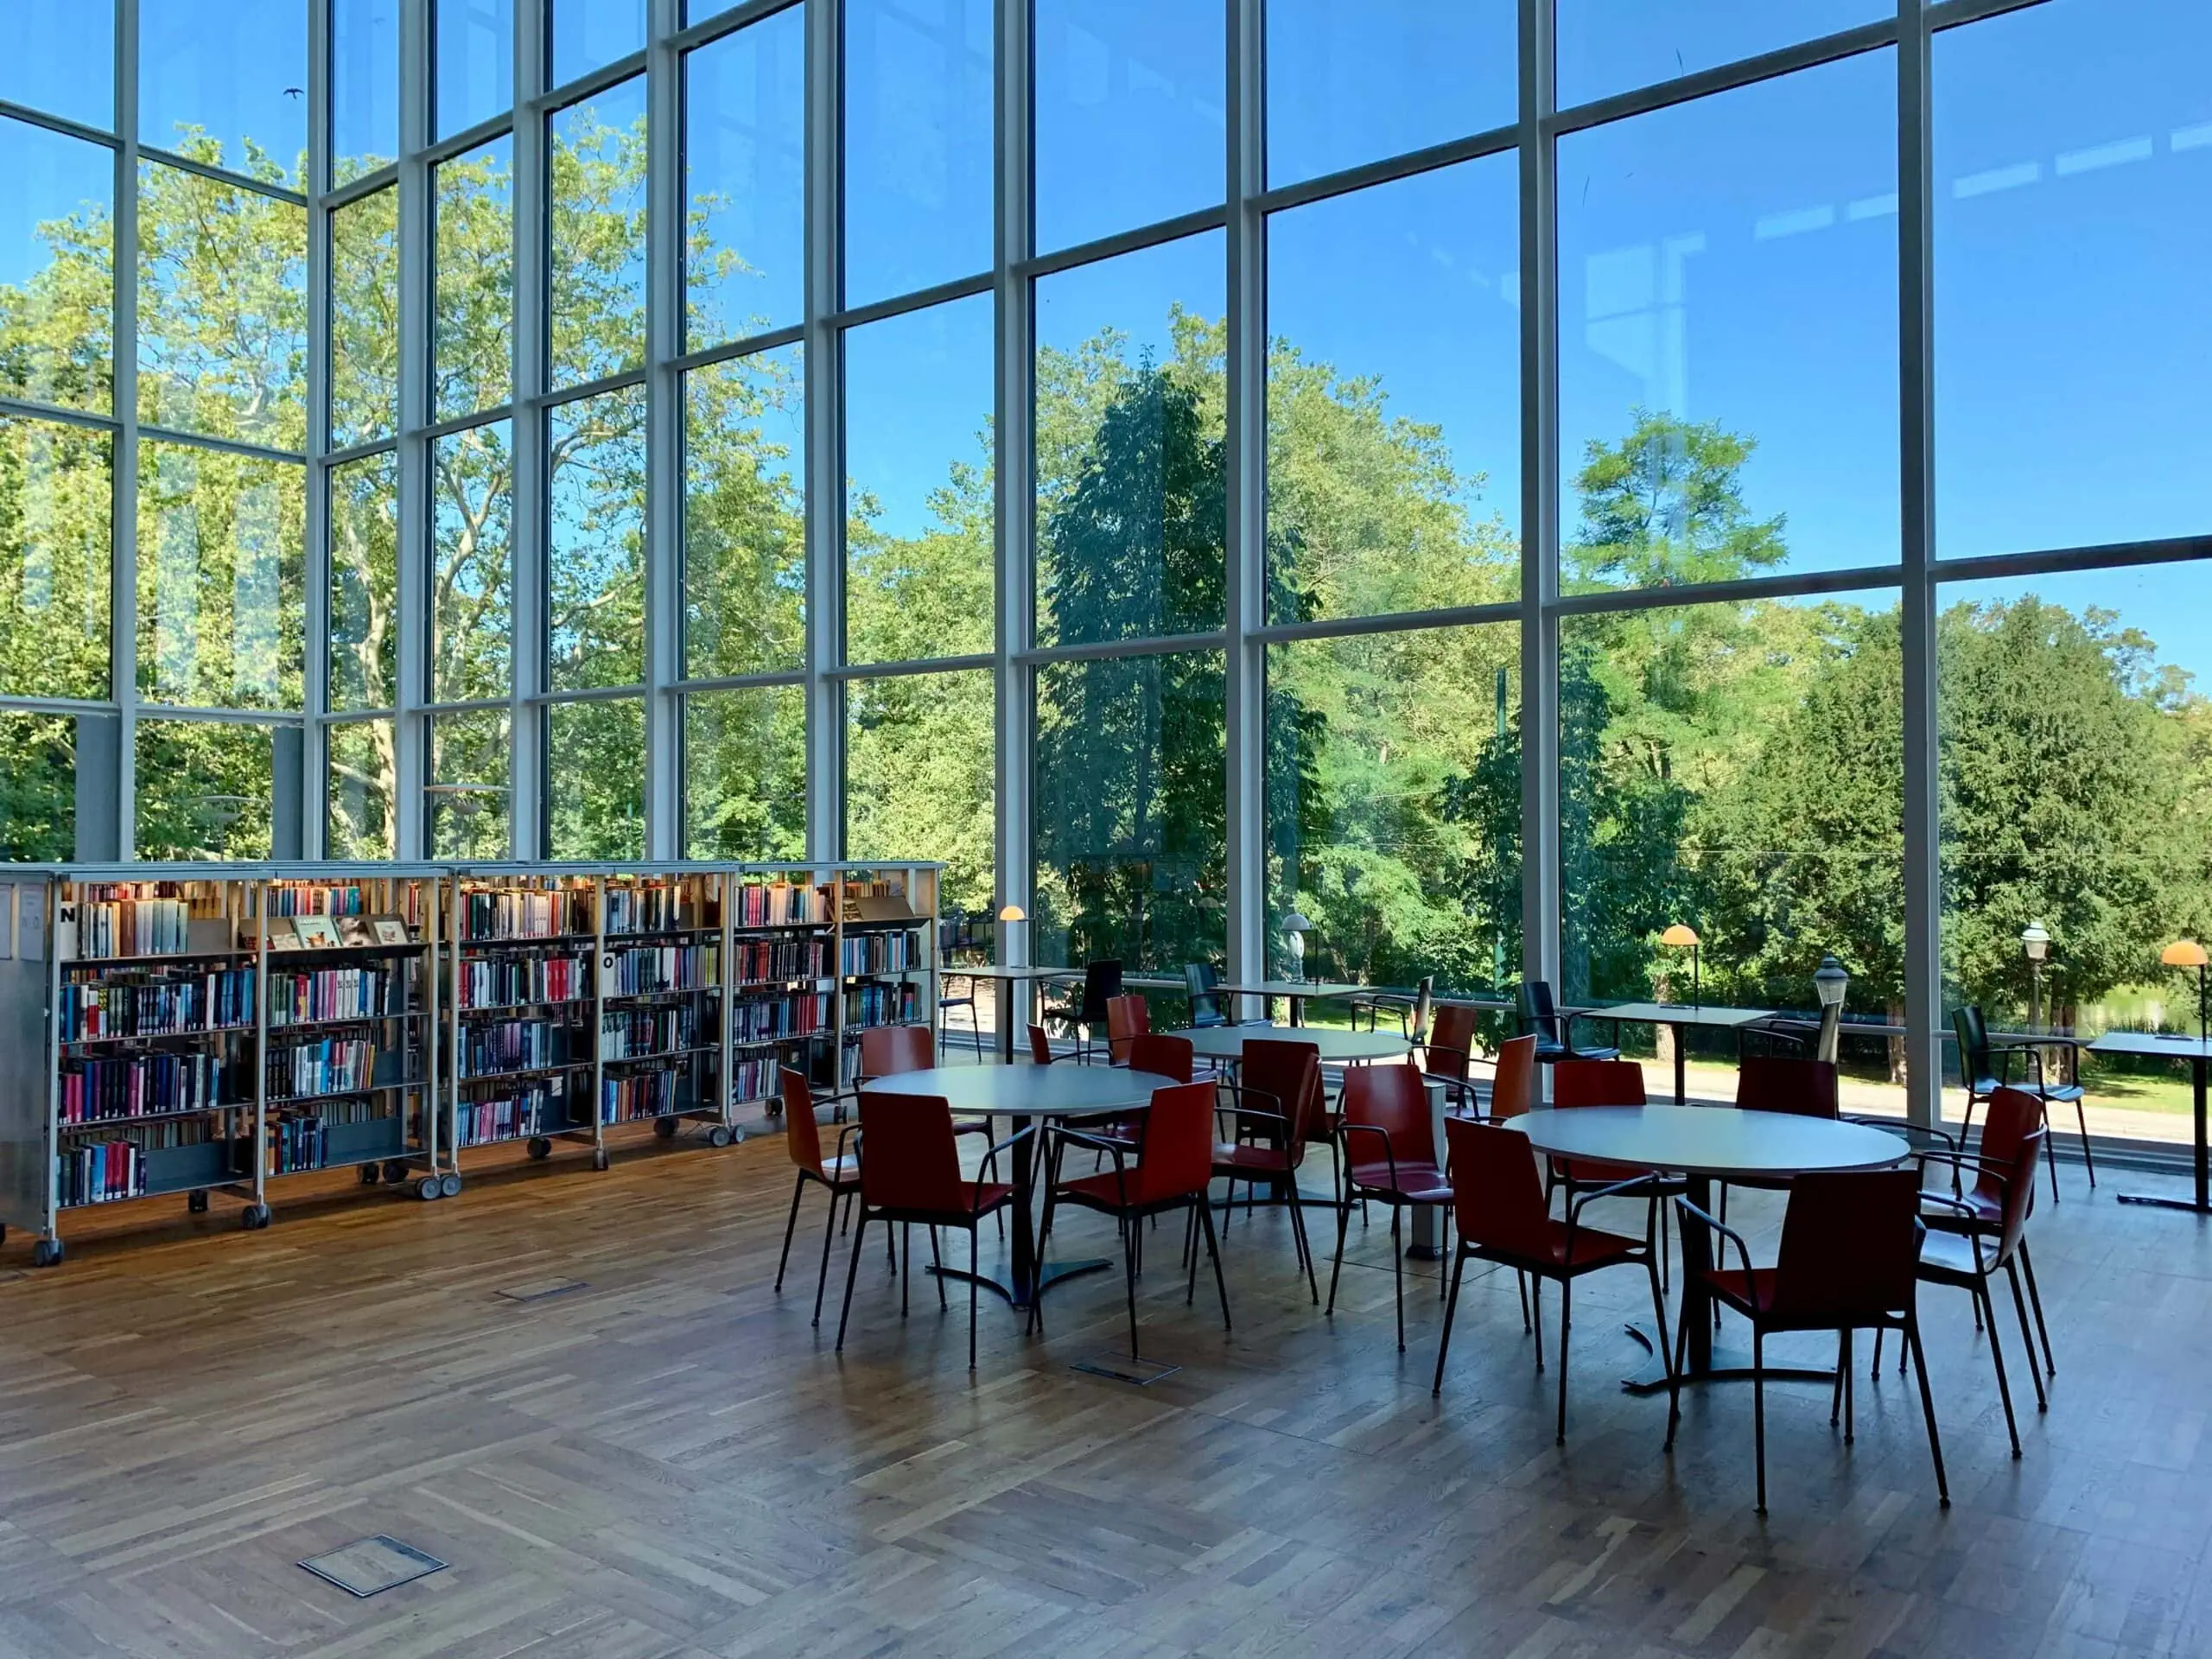 Library secured with access control technologies